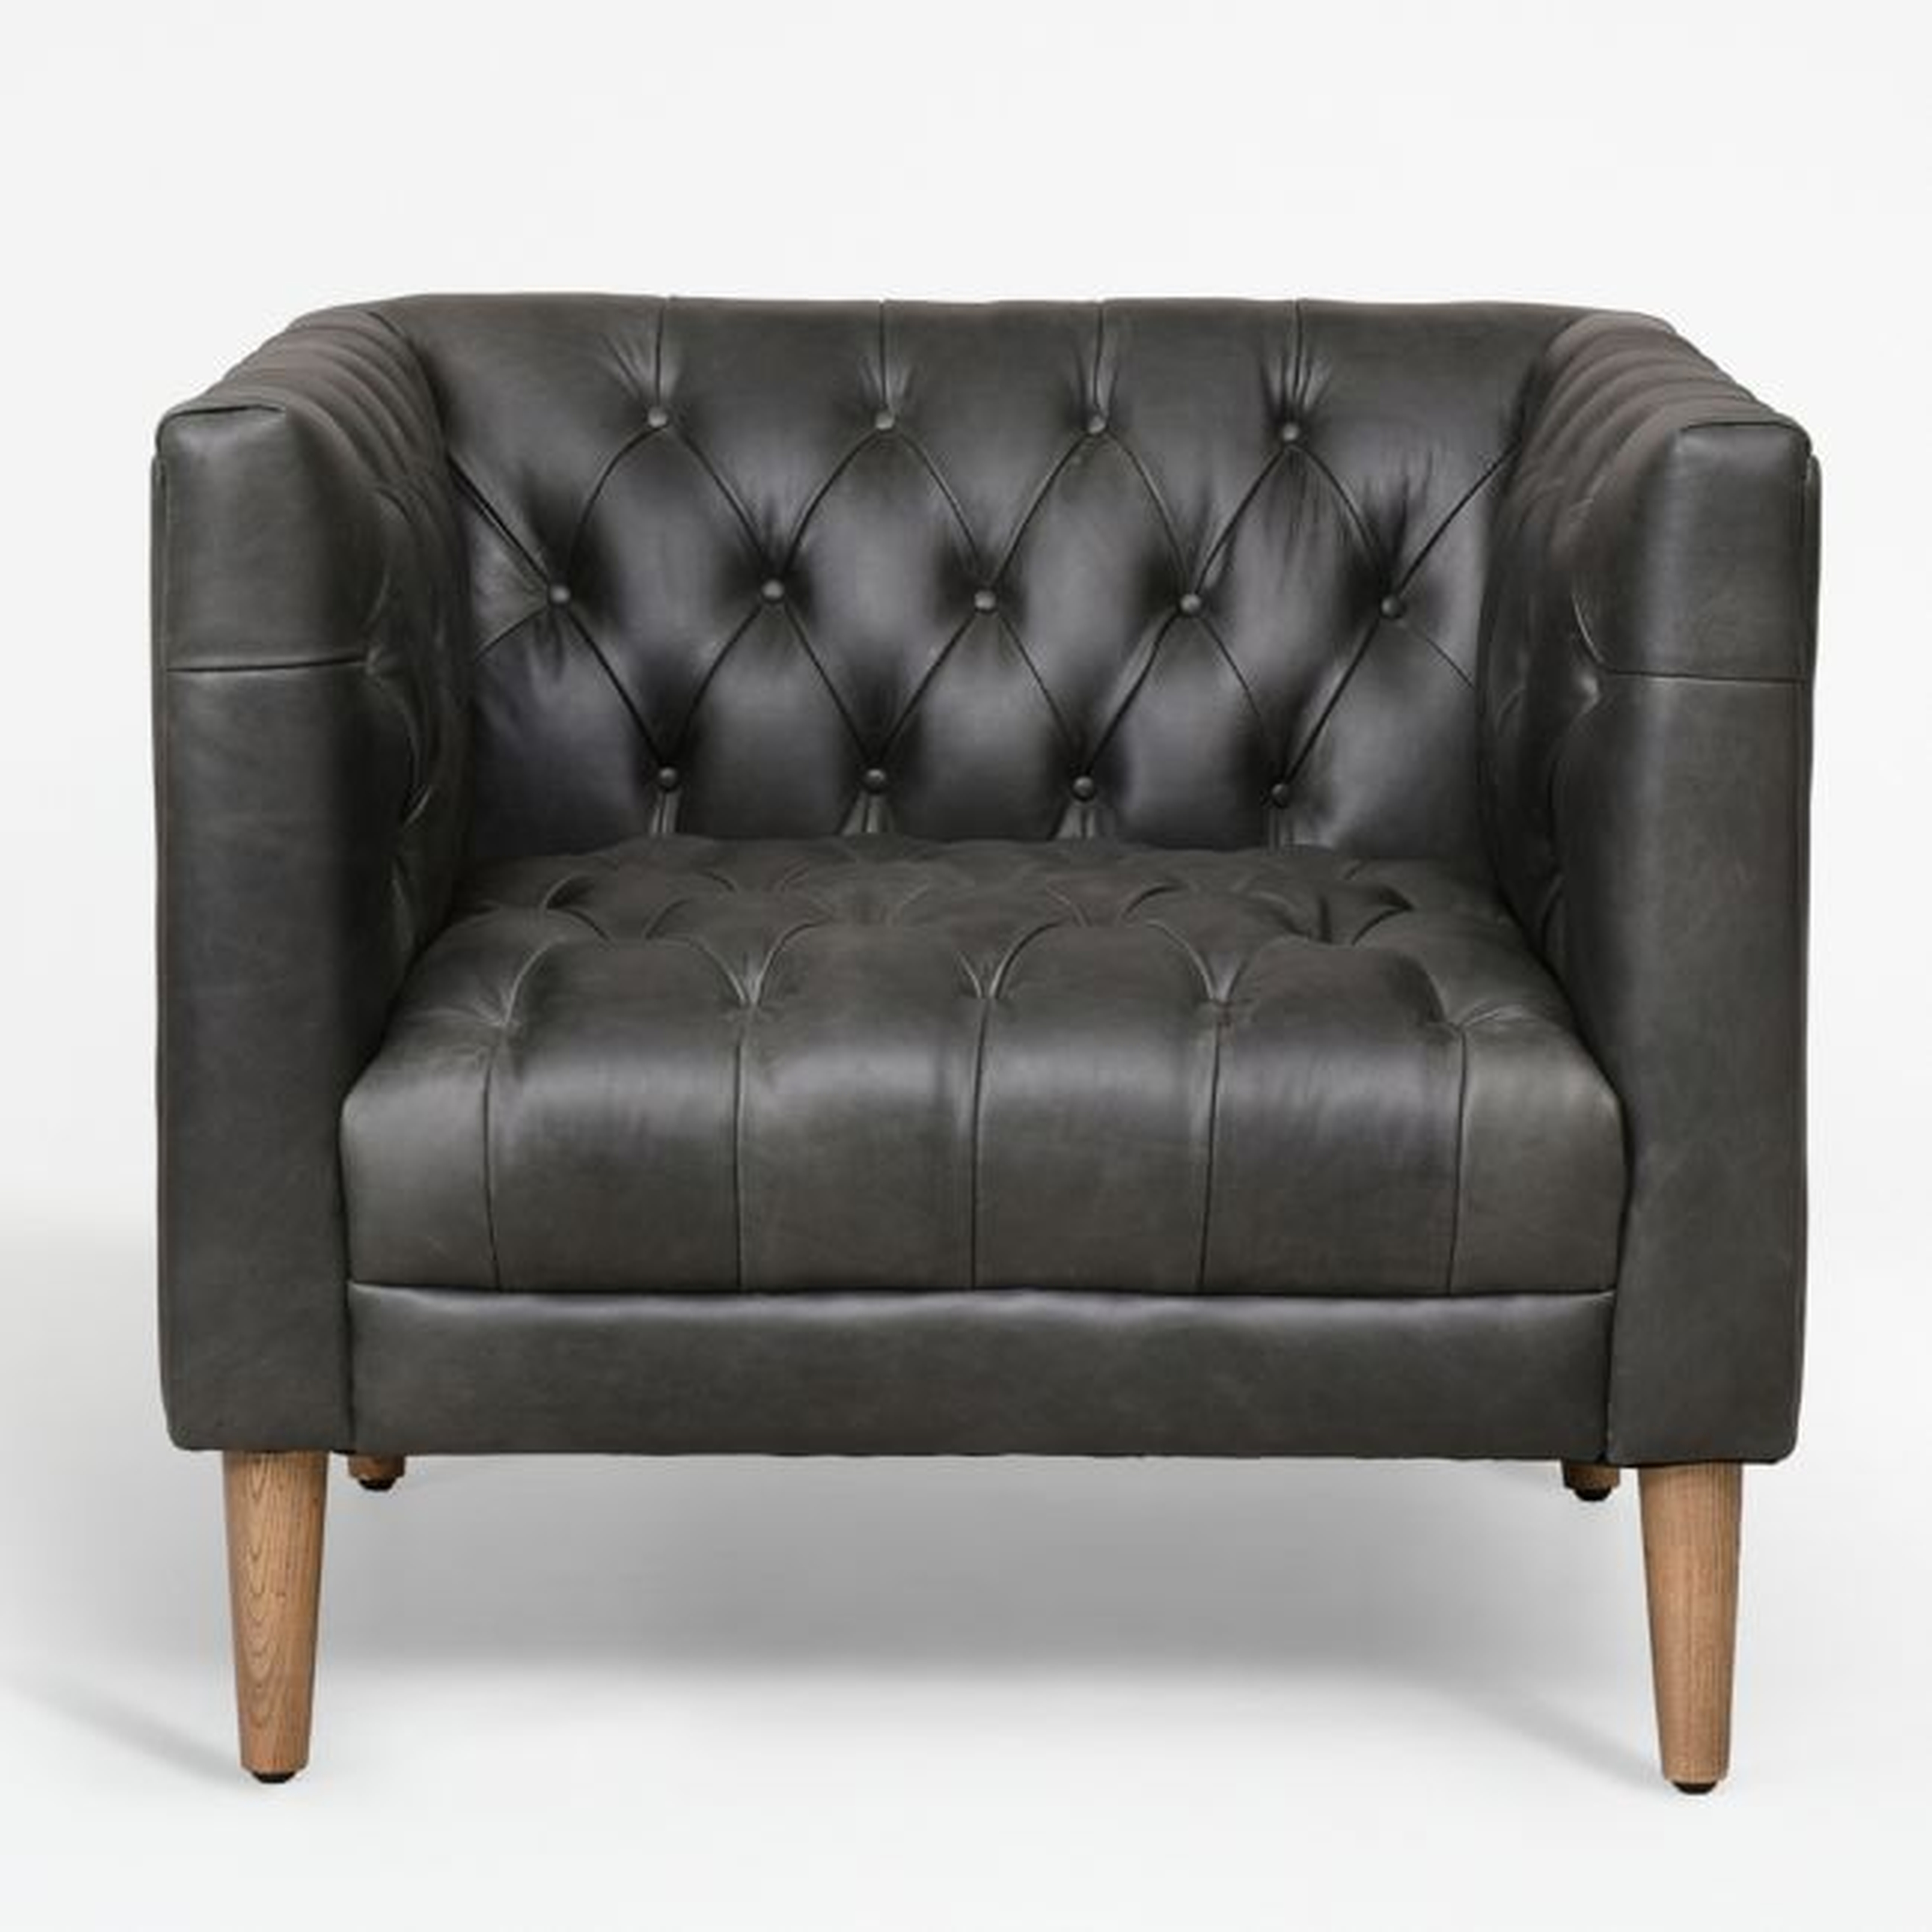 Rollins Ebony Leather Chair - Crate and Barrel